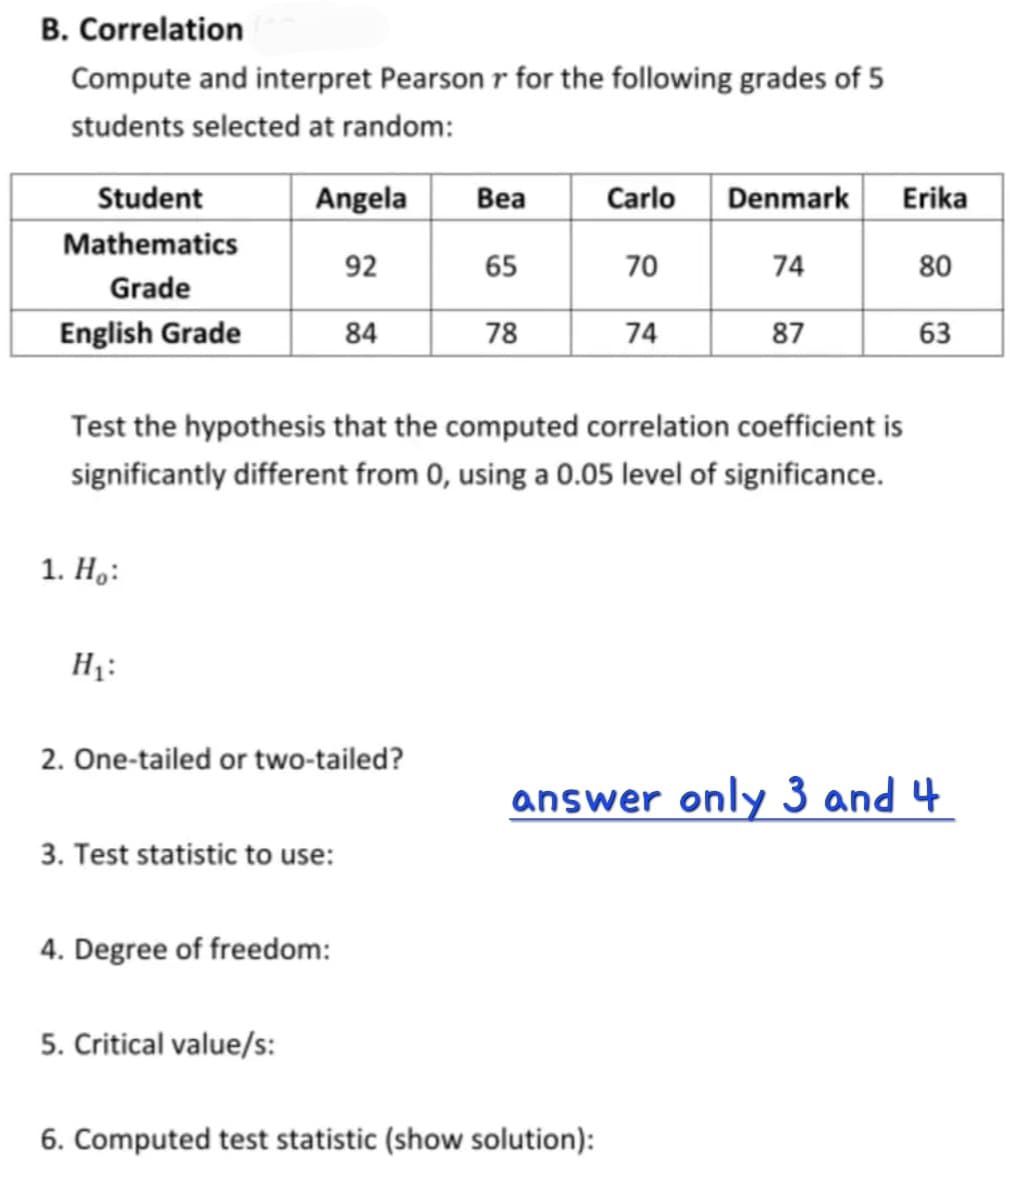 B. Correlation
Compute and interpret Pearson r for the following grades of 5
students selected at random:
Student
Angela
Вea
Carlo
Denmark
Erika
Mathematics
92
65
70
74
80
Grade
English Grade
84
78
74
87
63
Test the hypothesis that the computed correlation coefficient is
significantly different from 0, using a 0.05 level of significance.
1. Н.:
H1:
2. One-tailed or two-tailed?
answer only 3 and 4
3. Test statistic to use:
4. Degree of freedom:
5. Critical value/s:
6. Computed test statistic (show solution):
